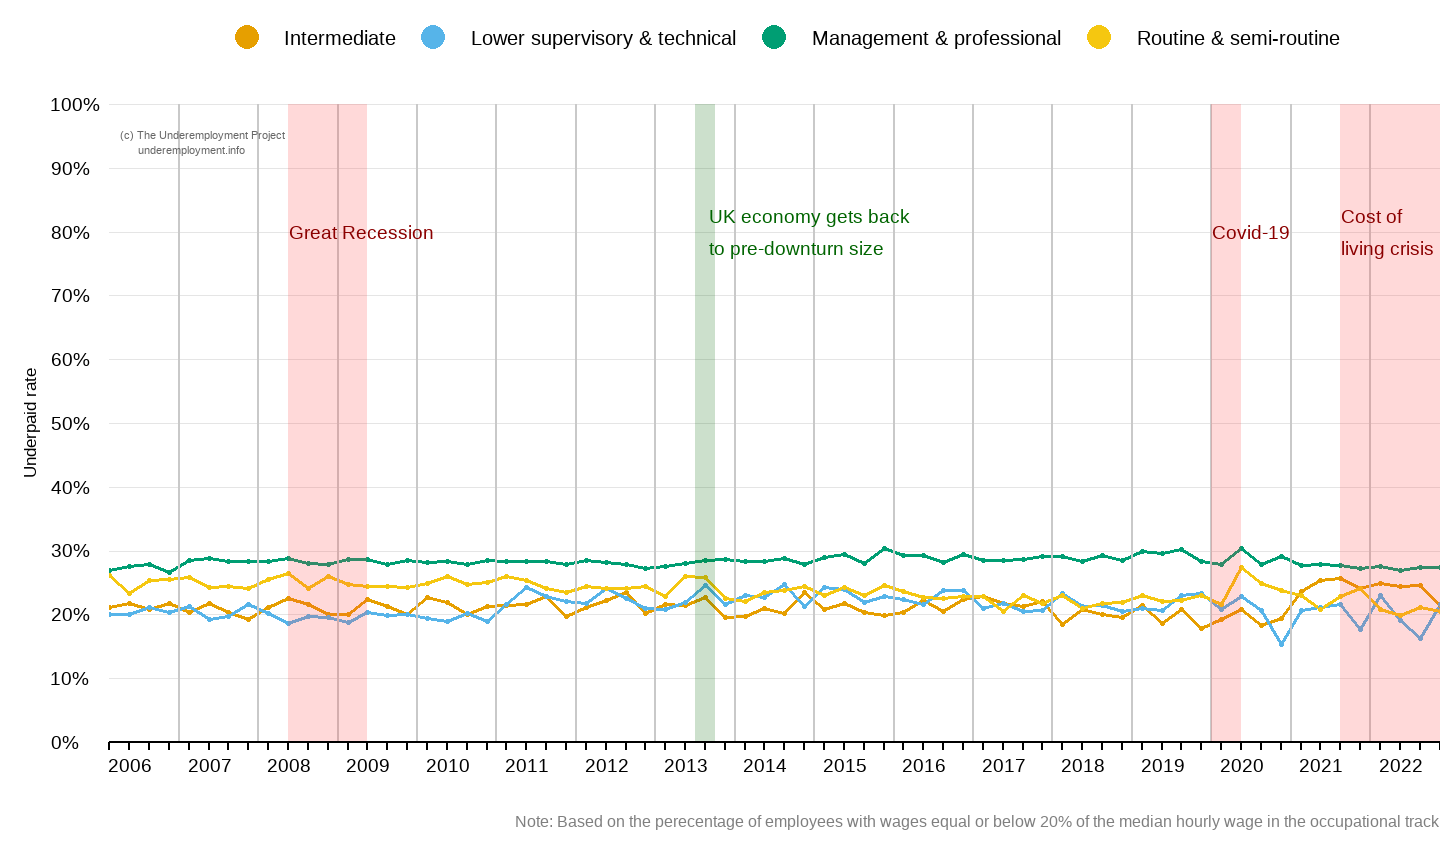 Higher proportion of underpaid employees among management and professional occupations